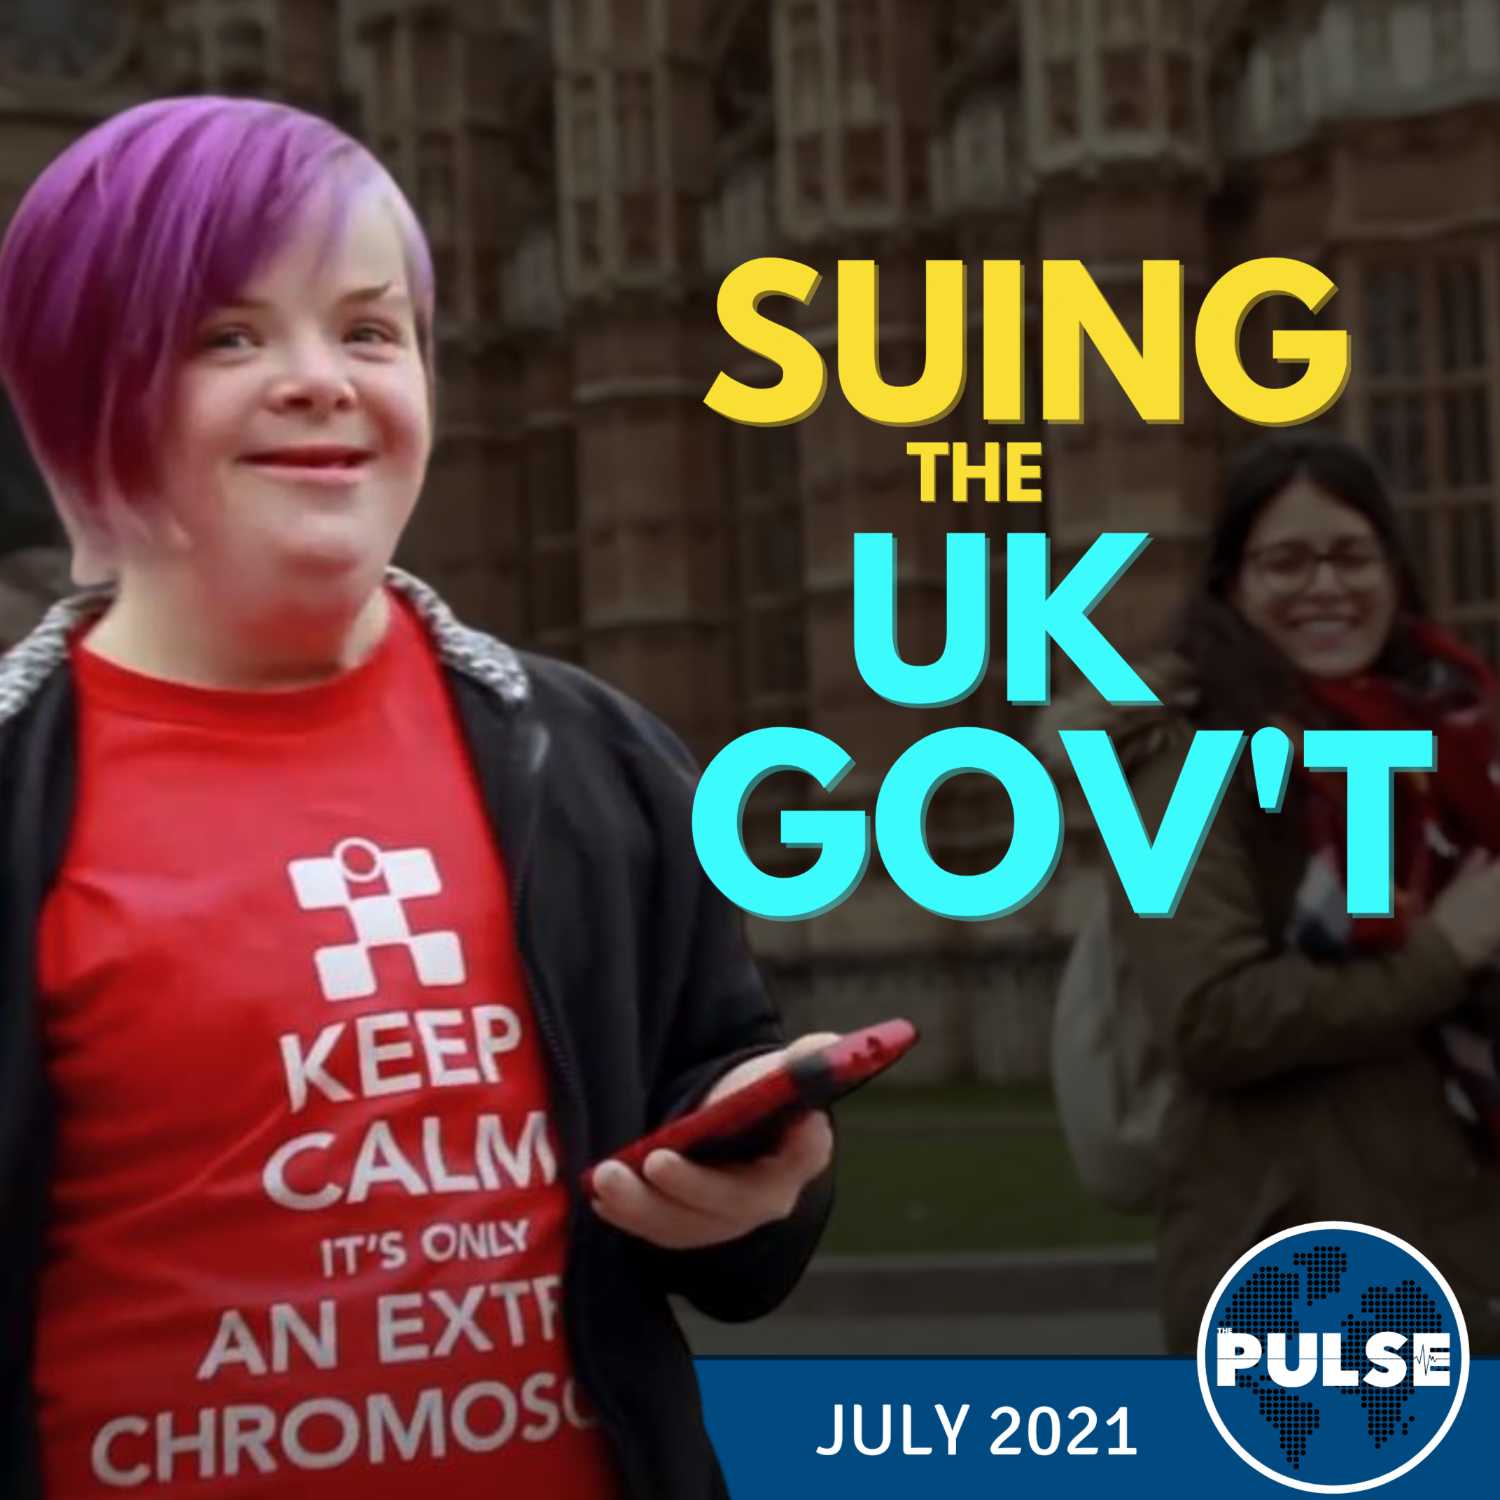 PULSE: A Woman With Down Syndrome Sues the UK Government, and more | July 2021